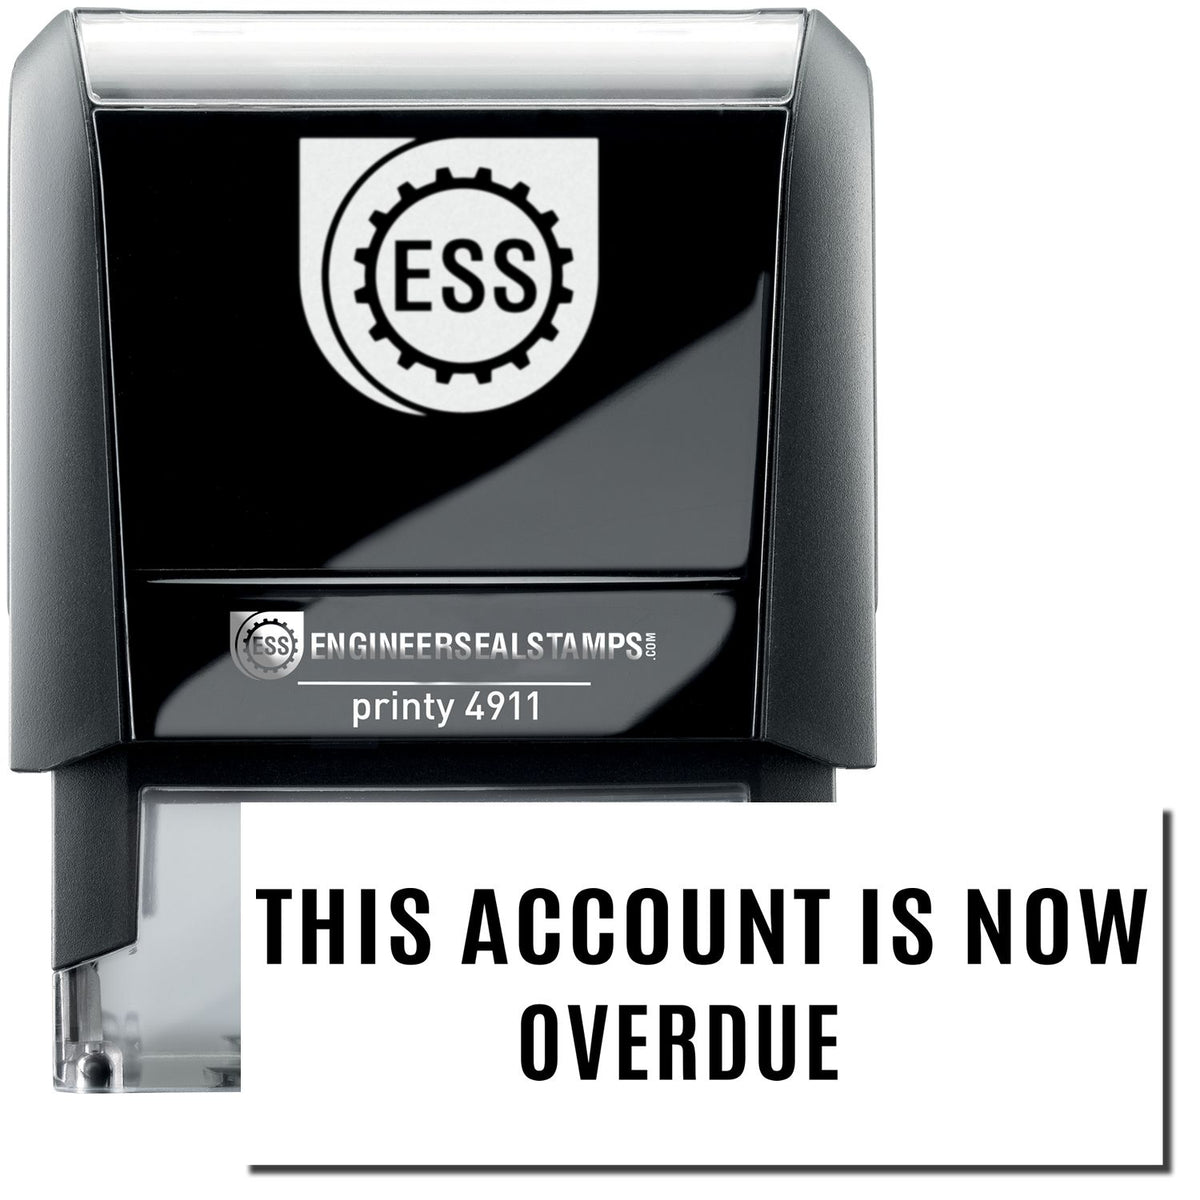 A self-inking stamp with a stamped image showing how the text &quot;THIS ACCOUNT IS NOW OVERDUE&quot; in a narrow font is displayed after stamping.